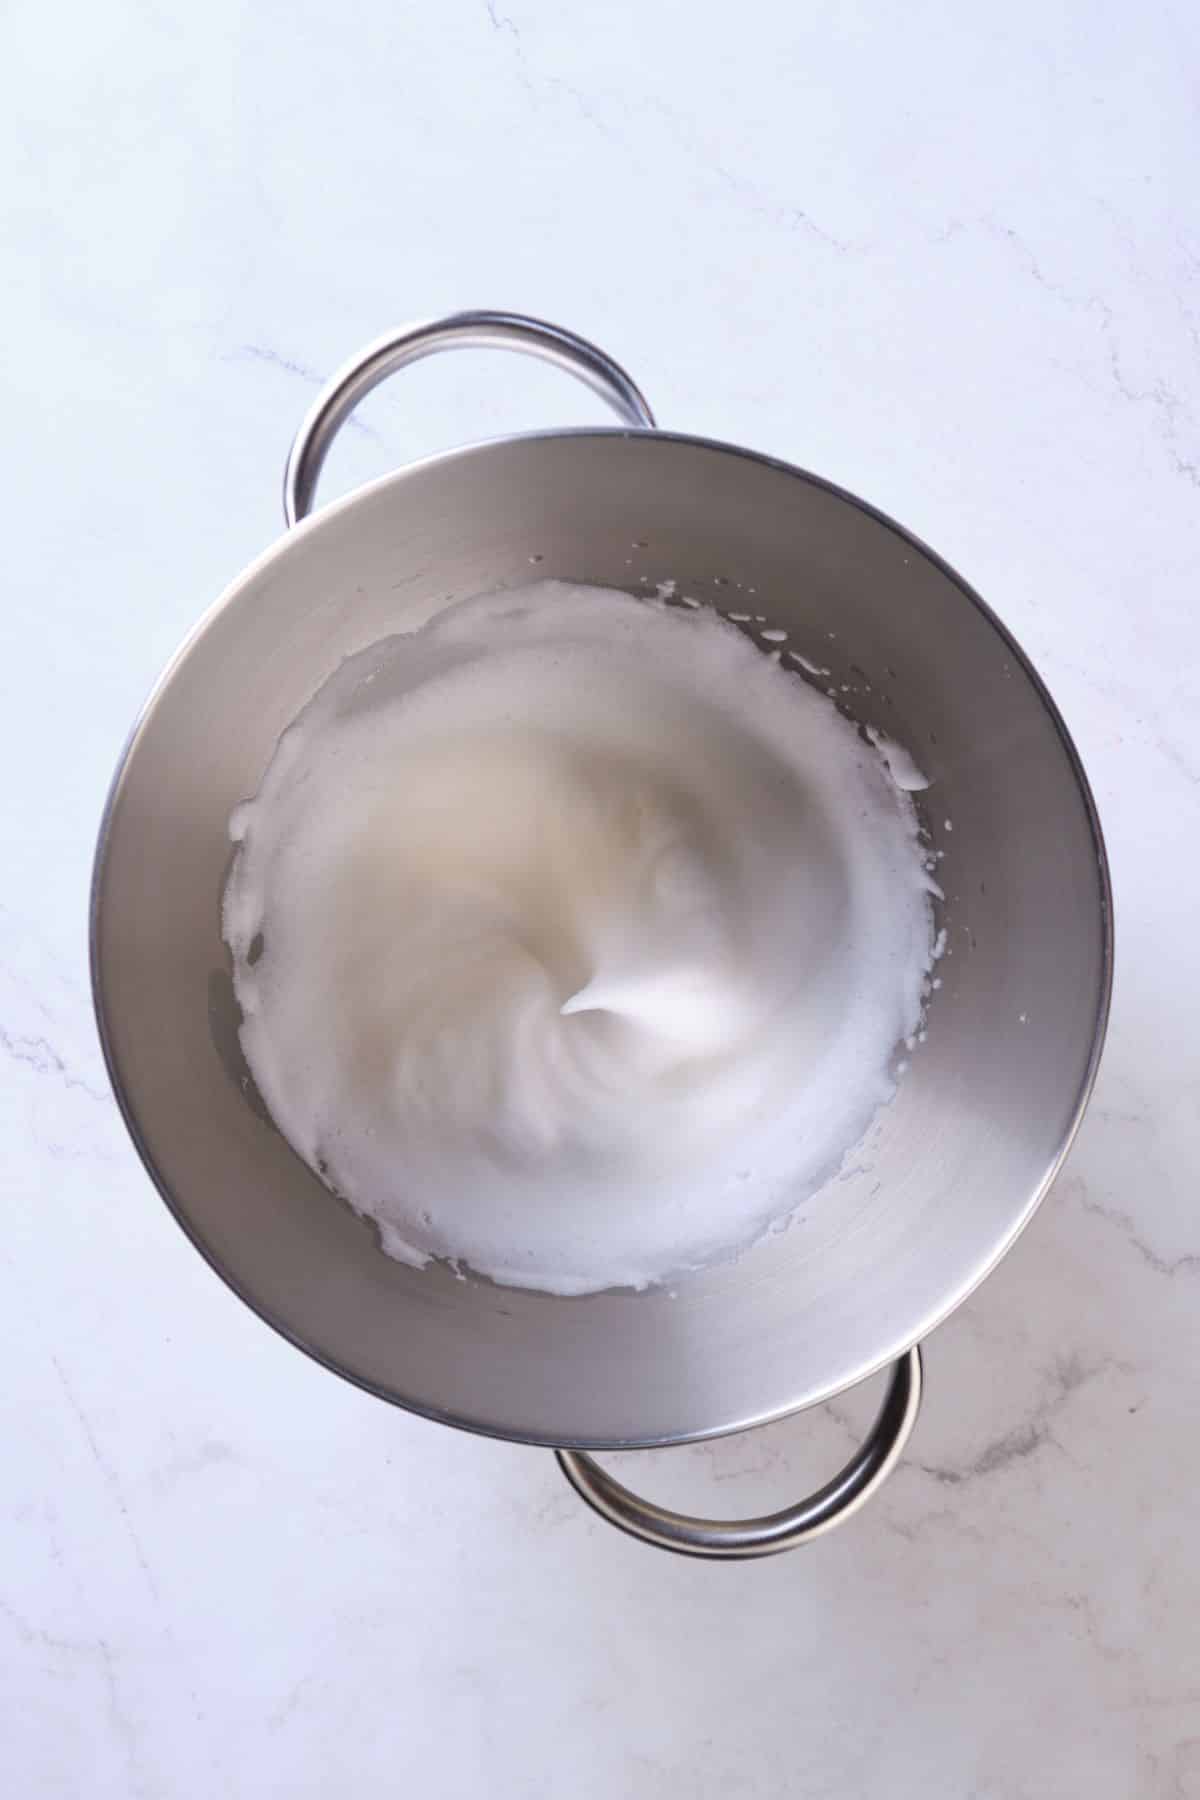 Beaten Egg whites in a stand mixer bowl.